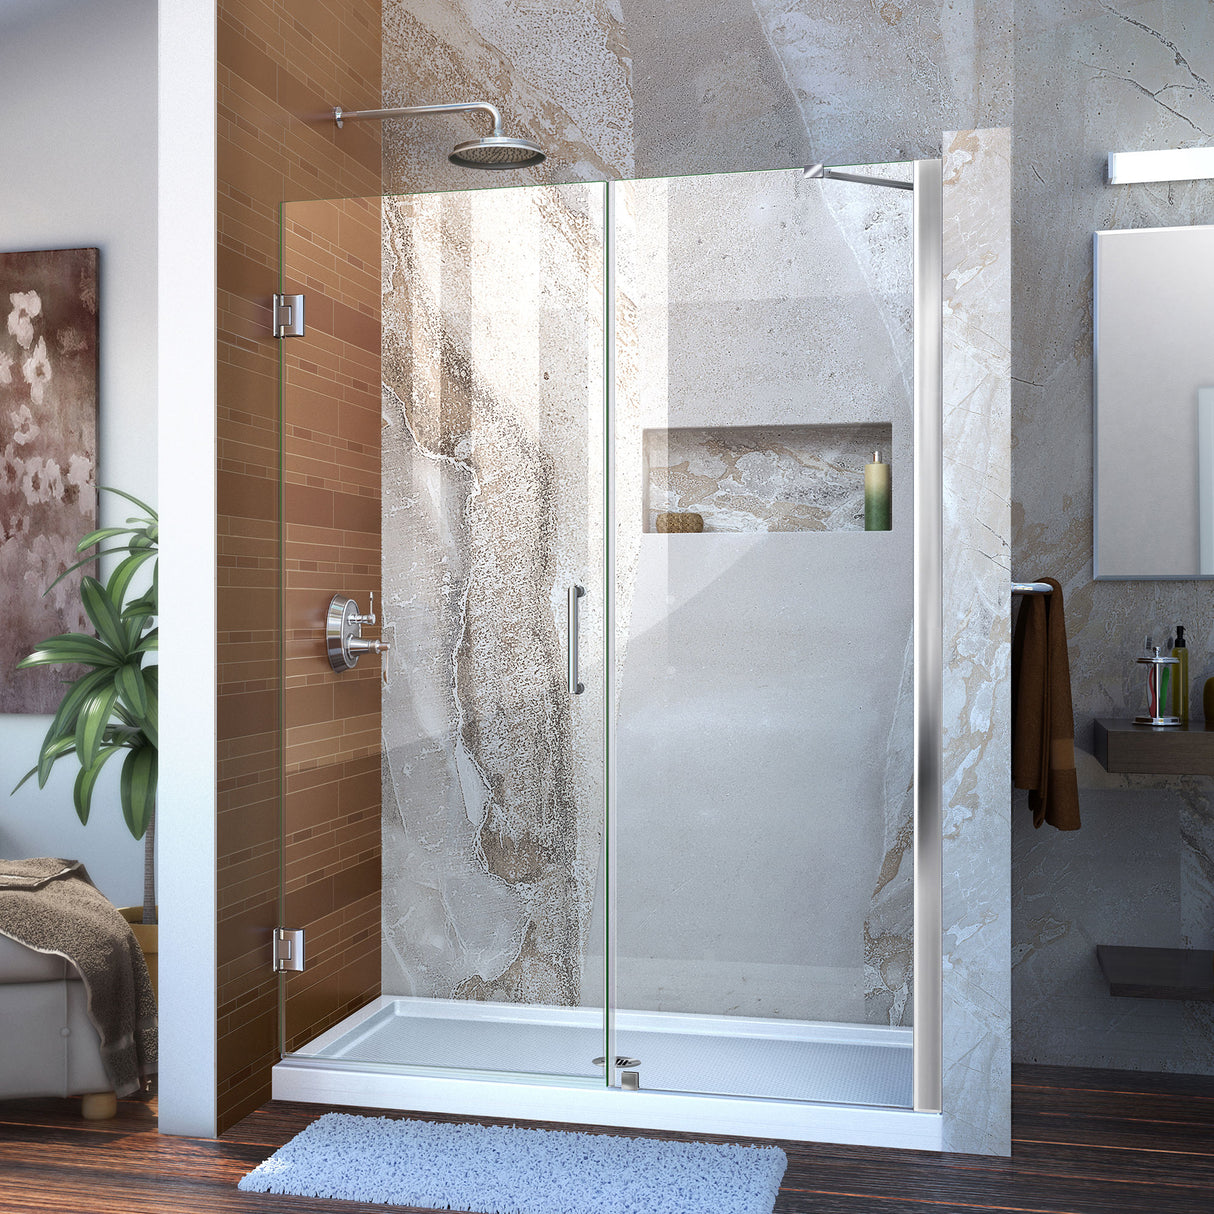 DreamLine Unidoor 49-50 in. W x 72 in. H Frameless Hinged Shower Door with Support Arm in Chrome